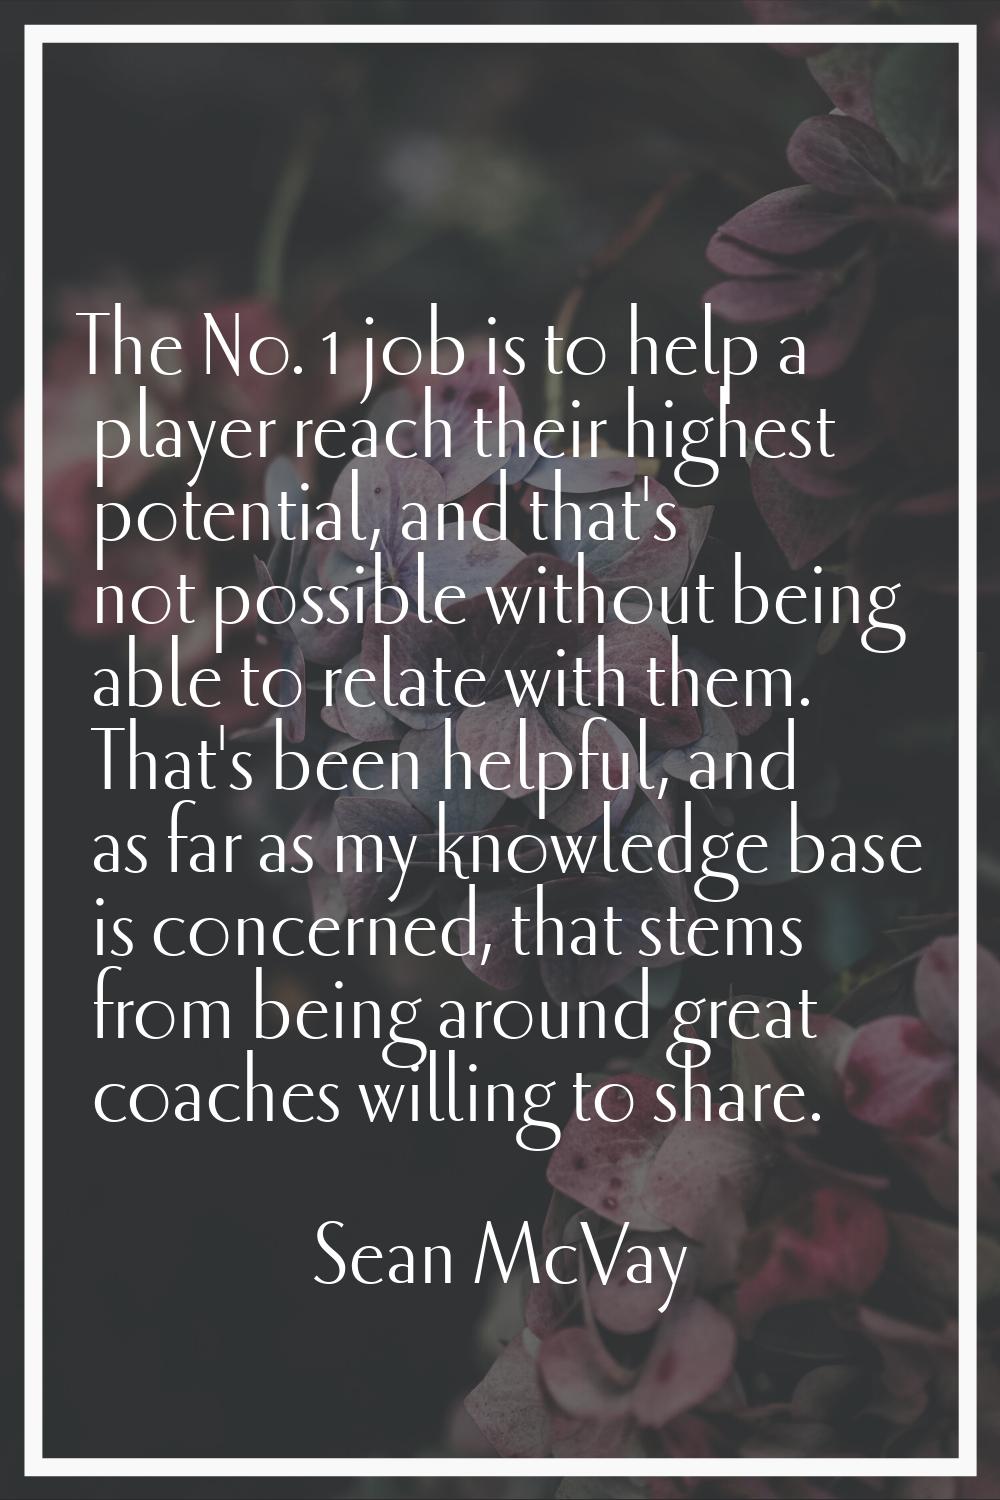 The No. 1 job is to help a player reach their highest potential, and that's not possible without be